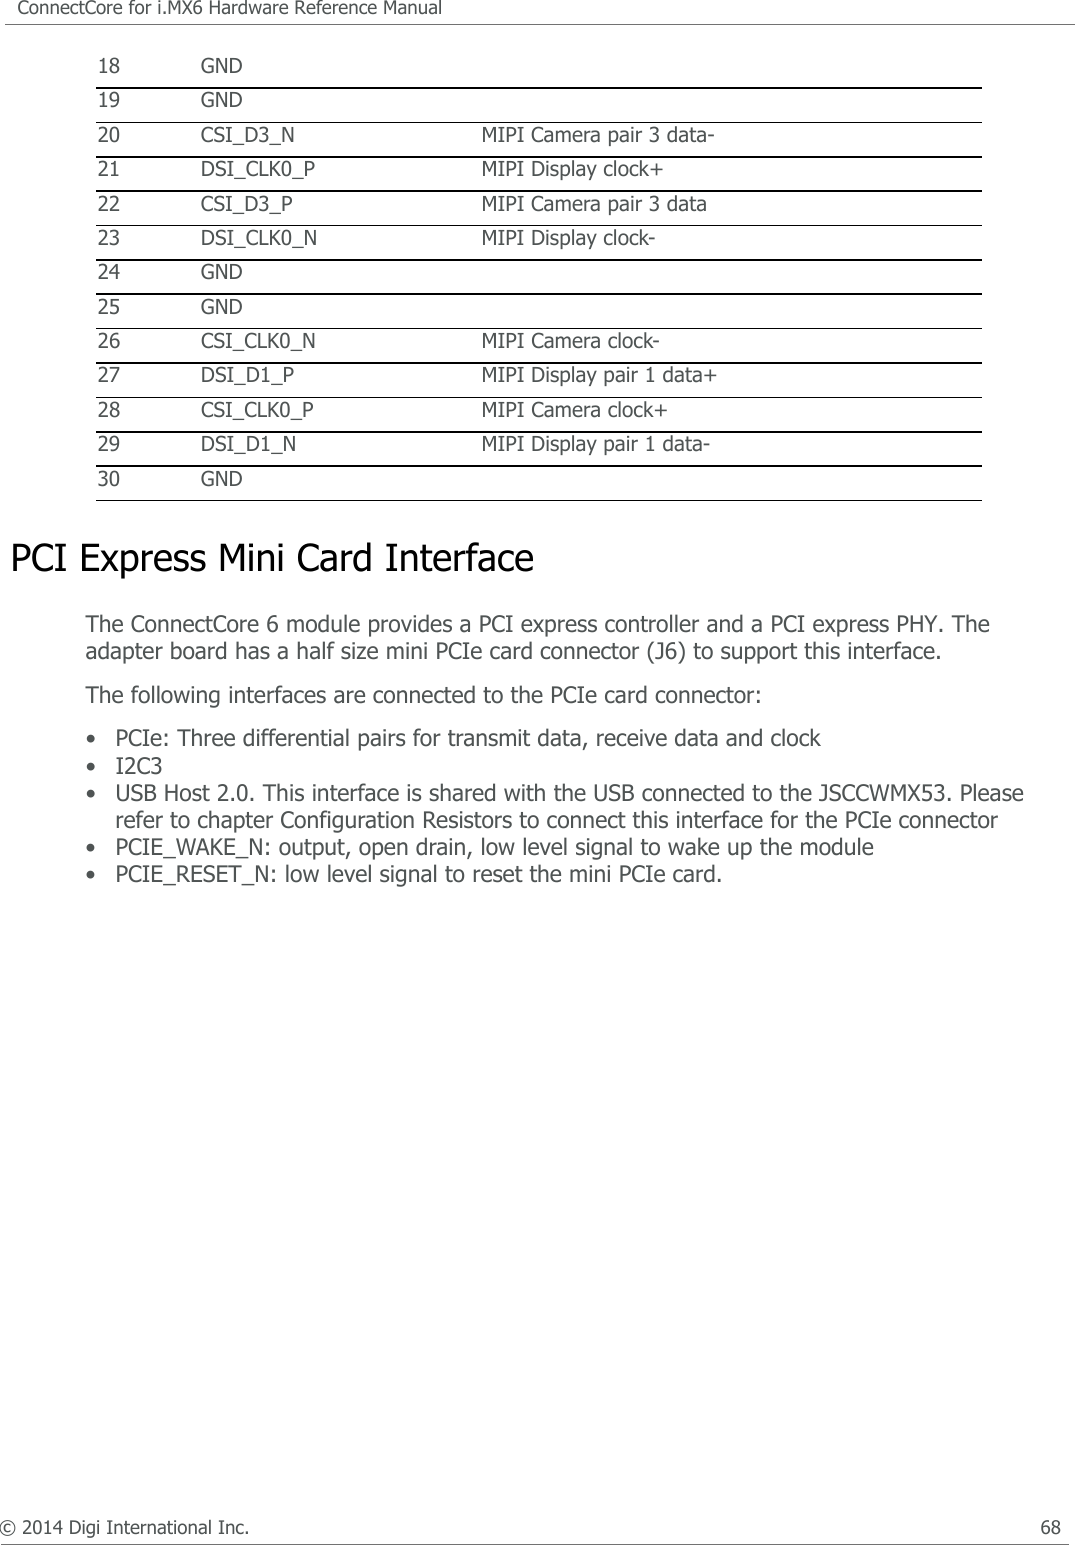 © 2014 Digi International Inc.      66ConnectCore for i.MX6 Hardware Reference ManualLVDS Connector, P7The table below shows the pinout of the LVDS1 connector, P7:MIPI Camera and MIPI Display The ConnectCore 6 board provides a MIPI camera serial interface (MIPI_CSI) compliant with the MIPI CSI-2 specification. A MIPI D-PHY is also included on the module, allowing direct connections between the module and a MIPI CSI-2 compliant camera sensor. This interface supports up to 4 differential data pairs.Pin Signal Comments1 +3.3V Generated on PMIC buckperi2 +3.3V Generated on PMIC buckperi3 GND4 LVDS1_TX0_N Transmission pair 0 data -5 LVDS1_TX0_P Transmission pair 0 data +6 GND7 LVDS1_TX1_N Transmission pair 1 data-8 LVDS1_TX1_P Transmission pair 1 data +9 GND10 LVDS1_TX2_N Transmission pair 2 data-11 LVDS1_TX2_P Transmission pair 2 data+12 GND13 LVDS1_CLK_N Transmission pair clock-14 LVDS1_CLK_P Transmission pair clock+15 GND16 LVDS1_TX3_N Transmission pair 3 data-17 LVDS1_TX3_P Transmission pair 3 data+18 GND19 nc20 nc21 nc22 nc23 LVDS1_PENIRQ# Connected to i.MX6 GPIO_16 pad24 ECSPI2_MOSI25 ECSPI2_MISO26 ECSPI2_CLK27 ECSPI2_SS1 Connected to i.MX6 EIM_LBA pad28 PWM1 Shared with MIPI display29 +5V Generated on adapter board30 +5V Generated on adapter board